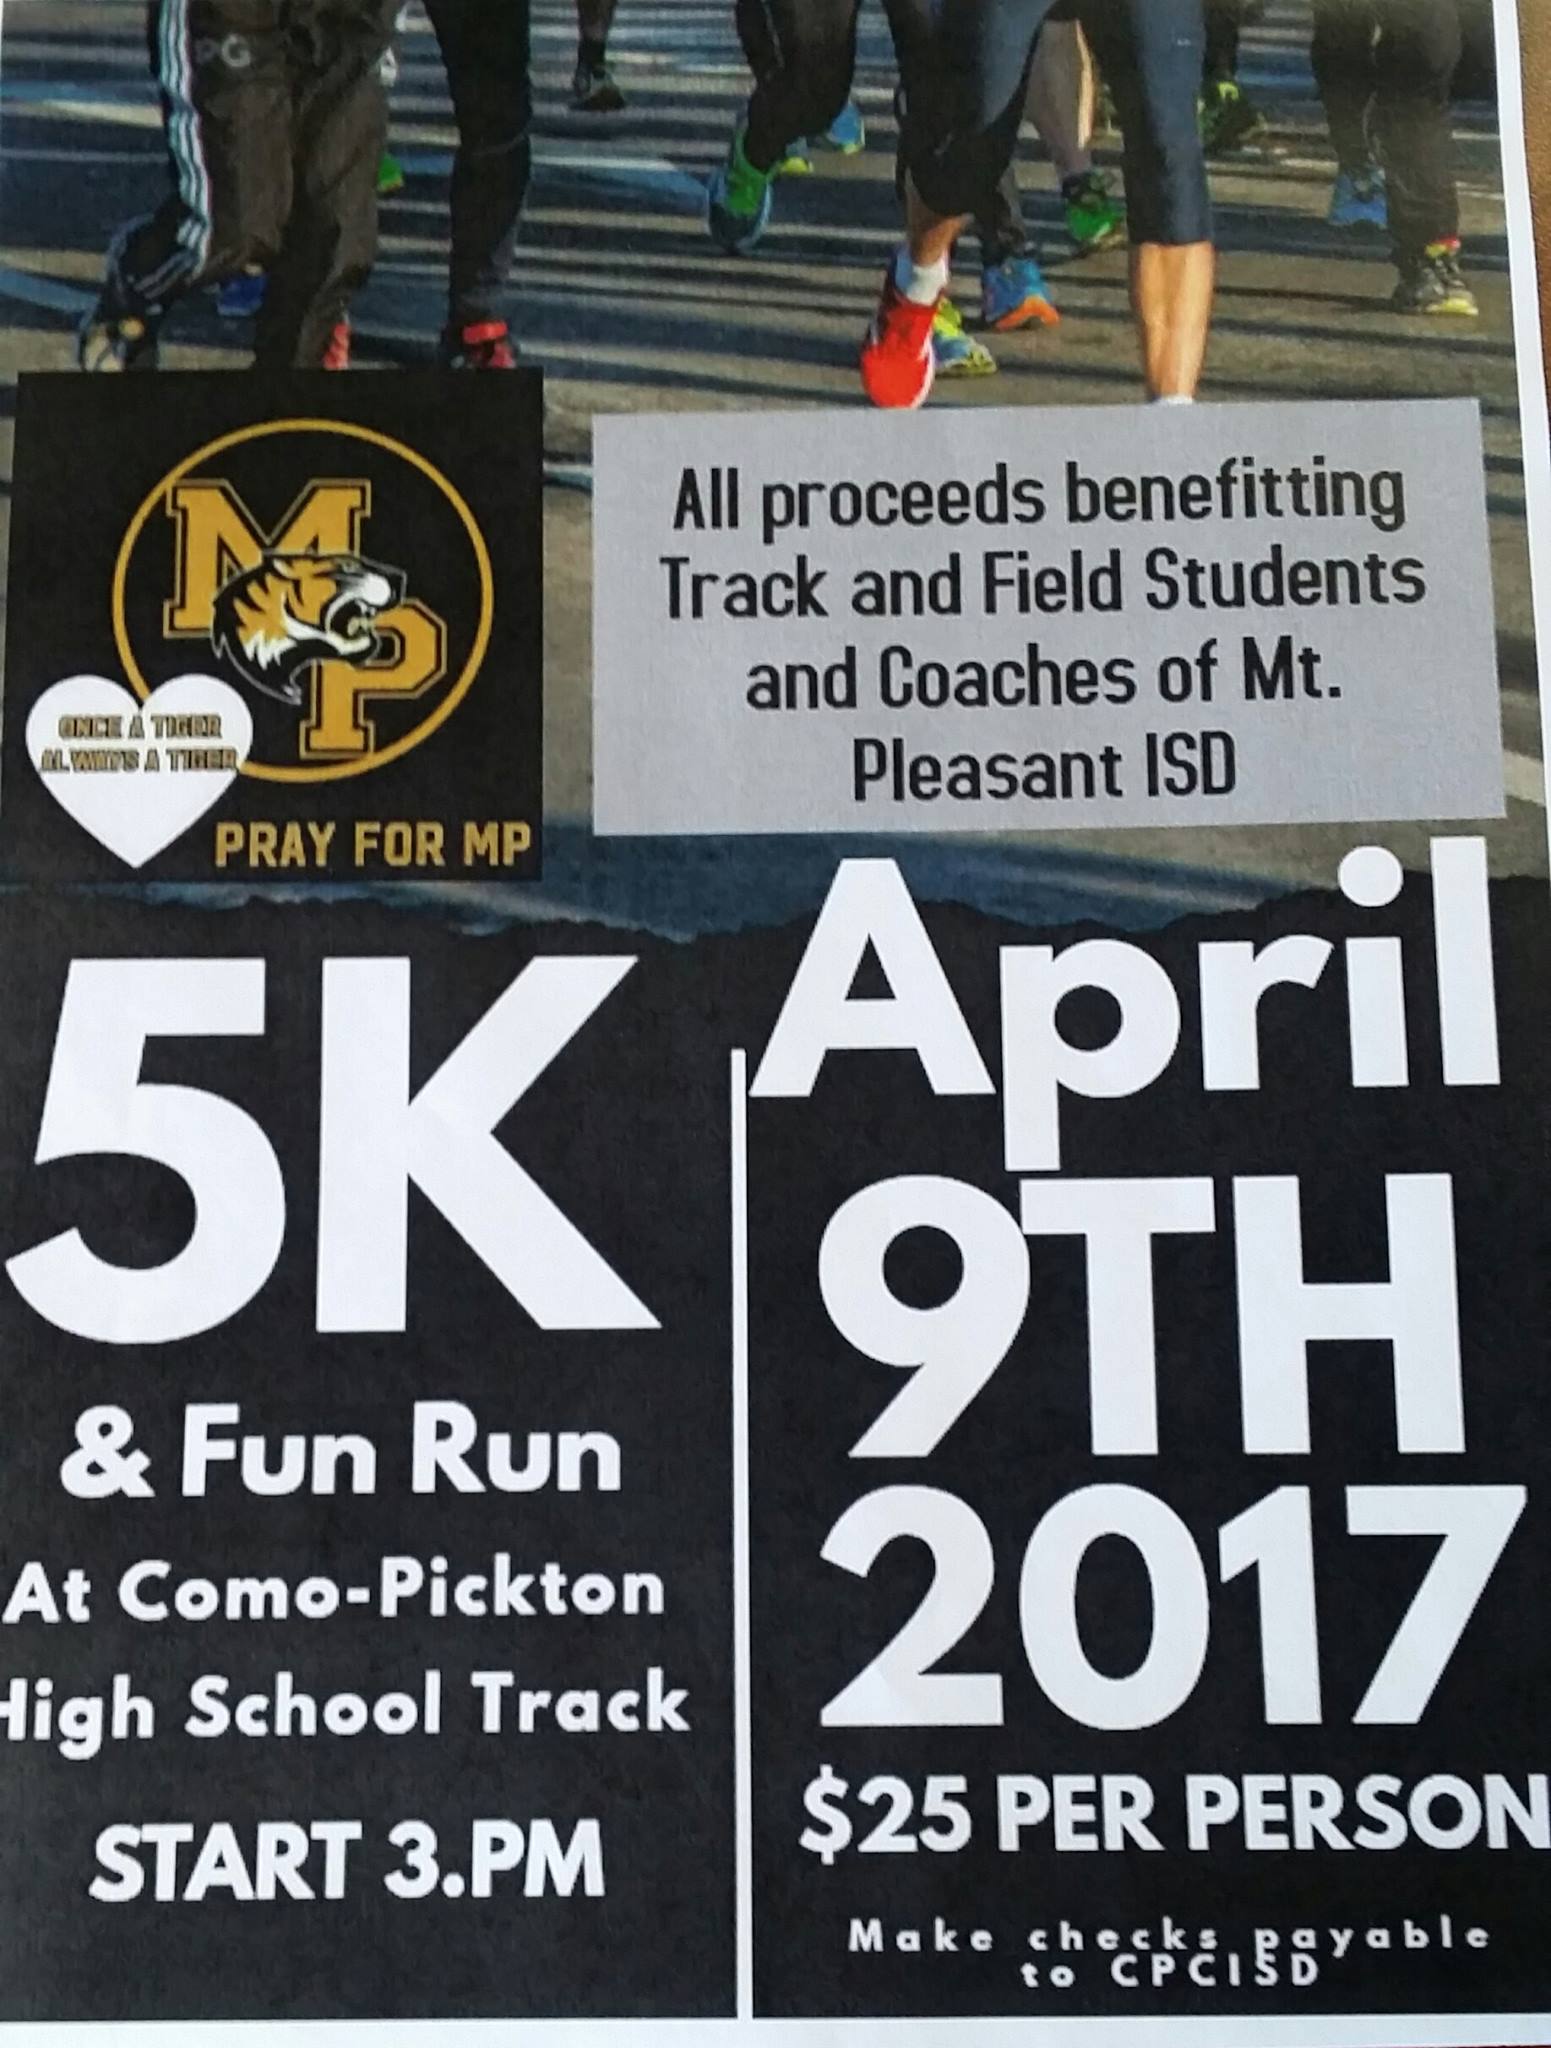 CPCISD Hosting Fun Run to Benefit Students and Coaches from Mt Pleasant High School